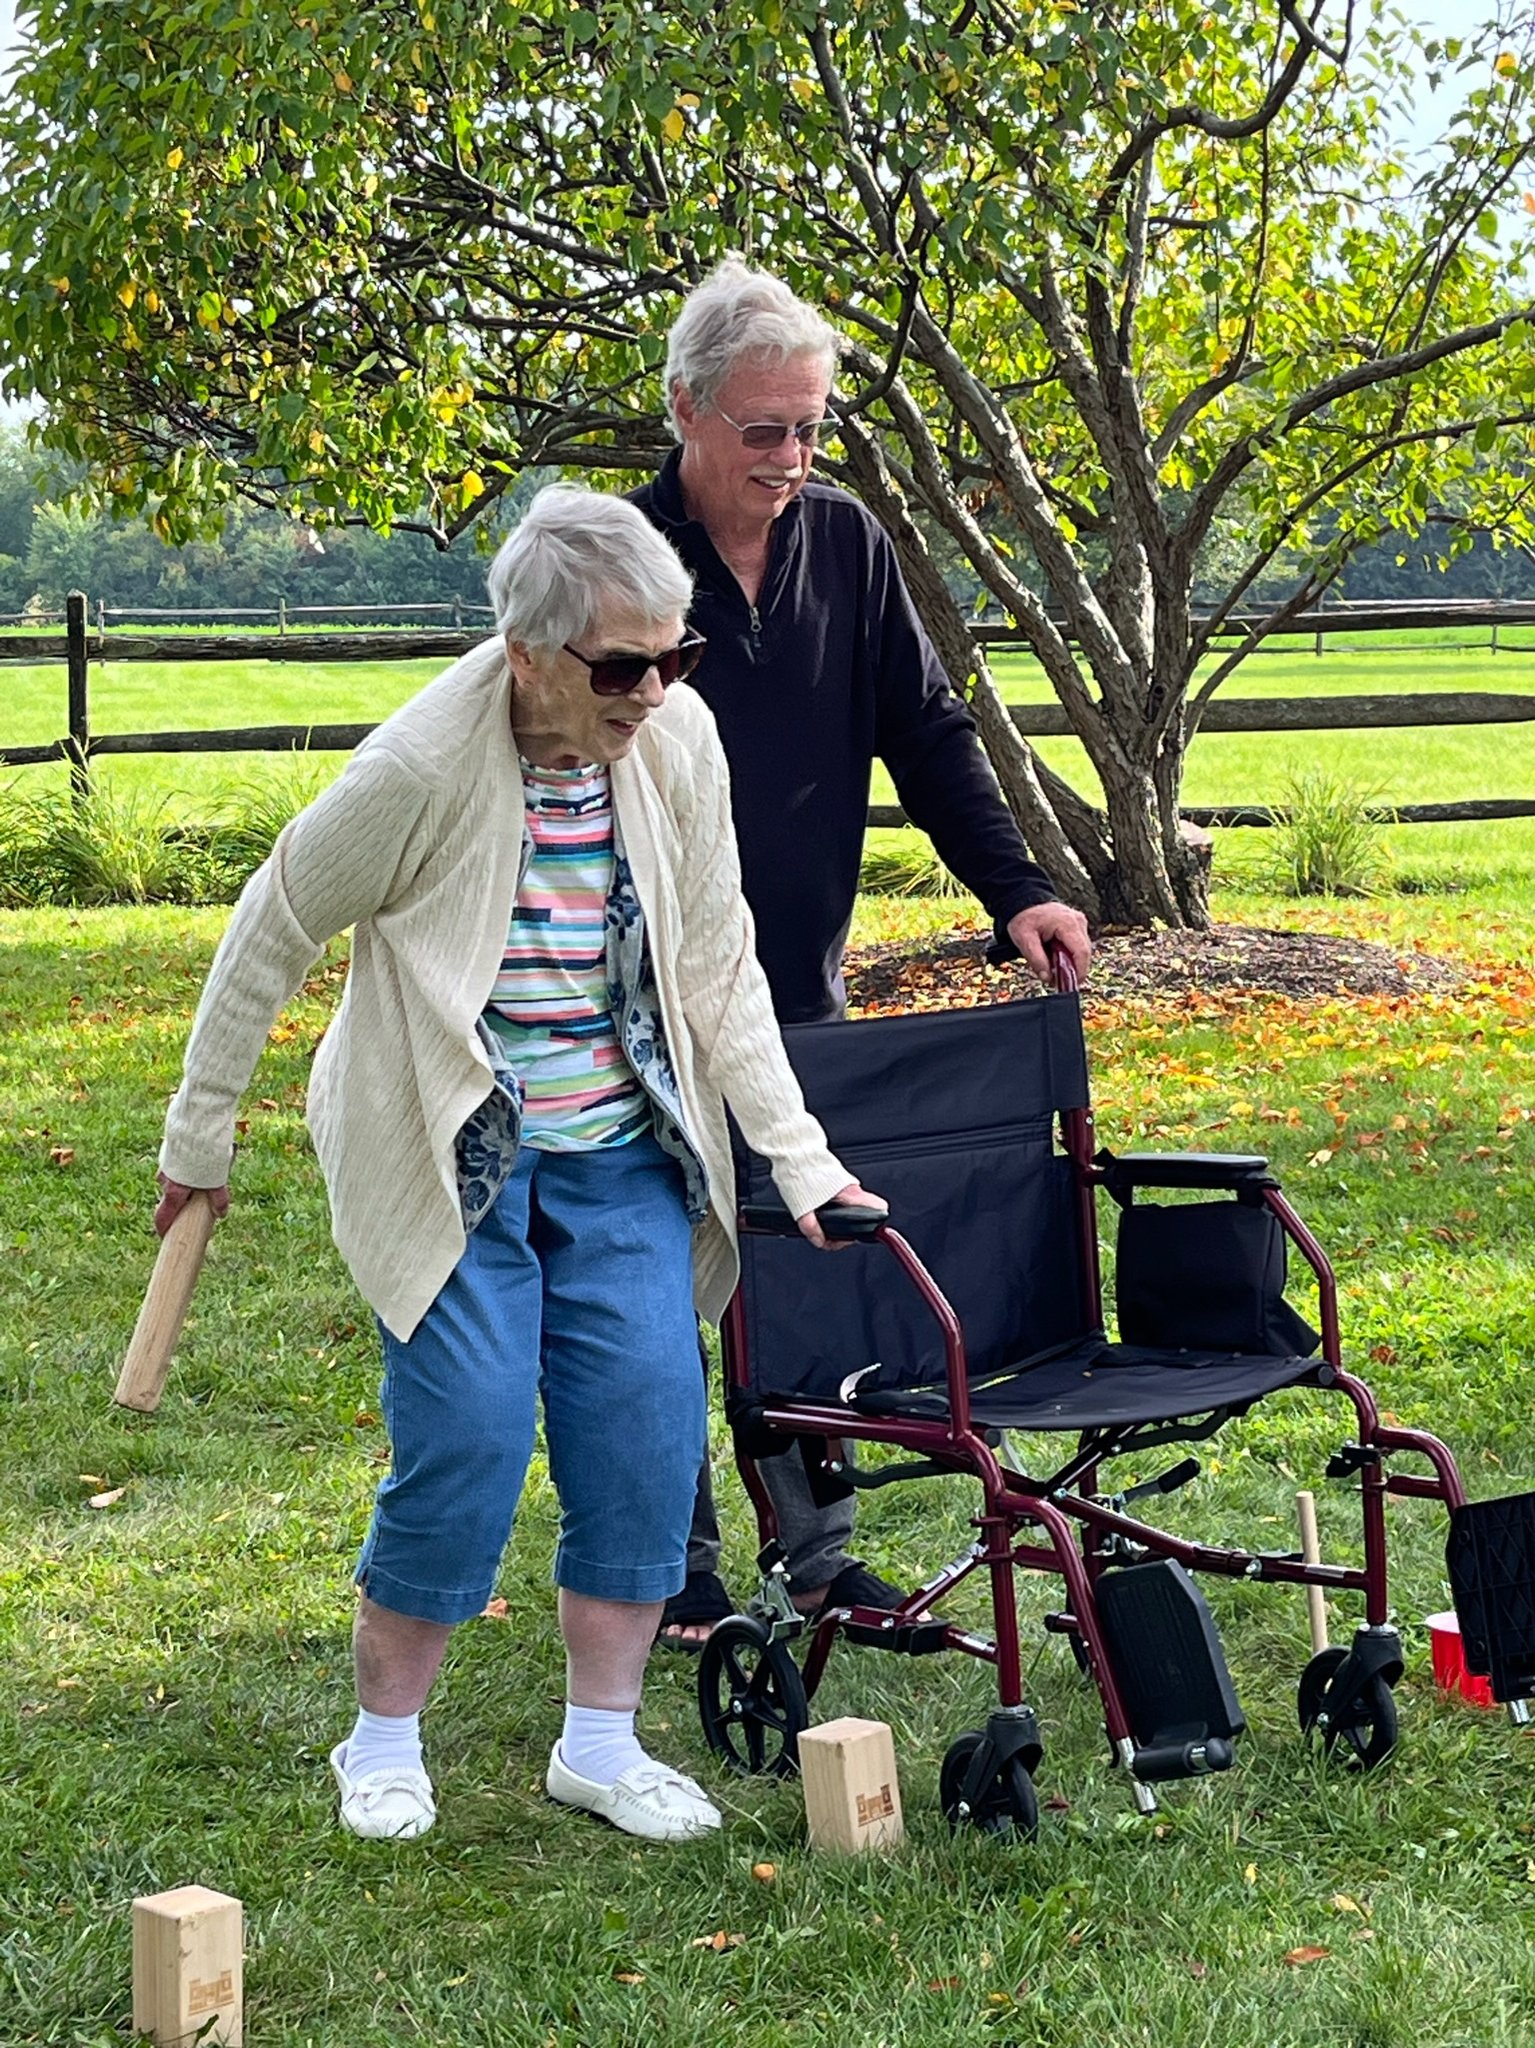 An elderly woman holding onto a wheelchair bends her knees while preparing to toss a wooden kubb baton